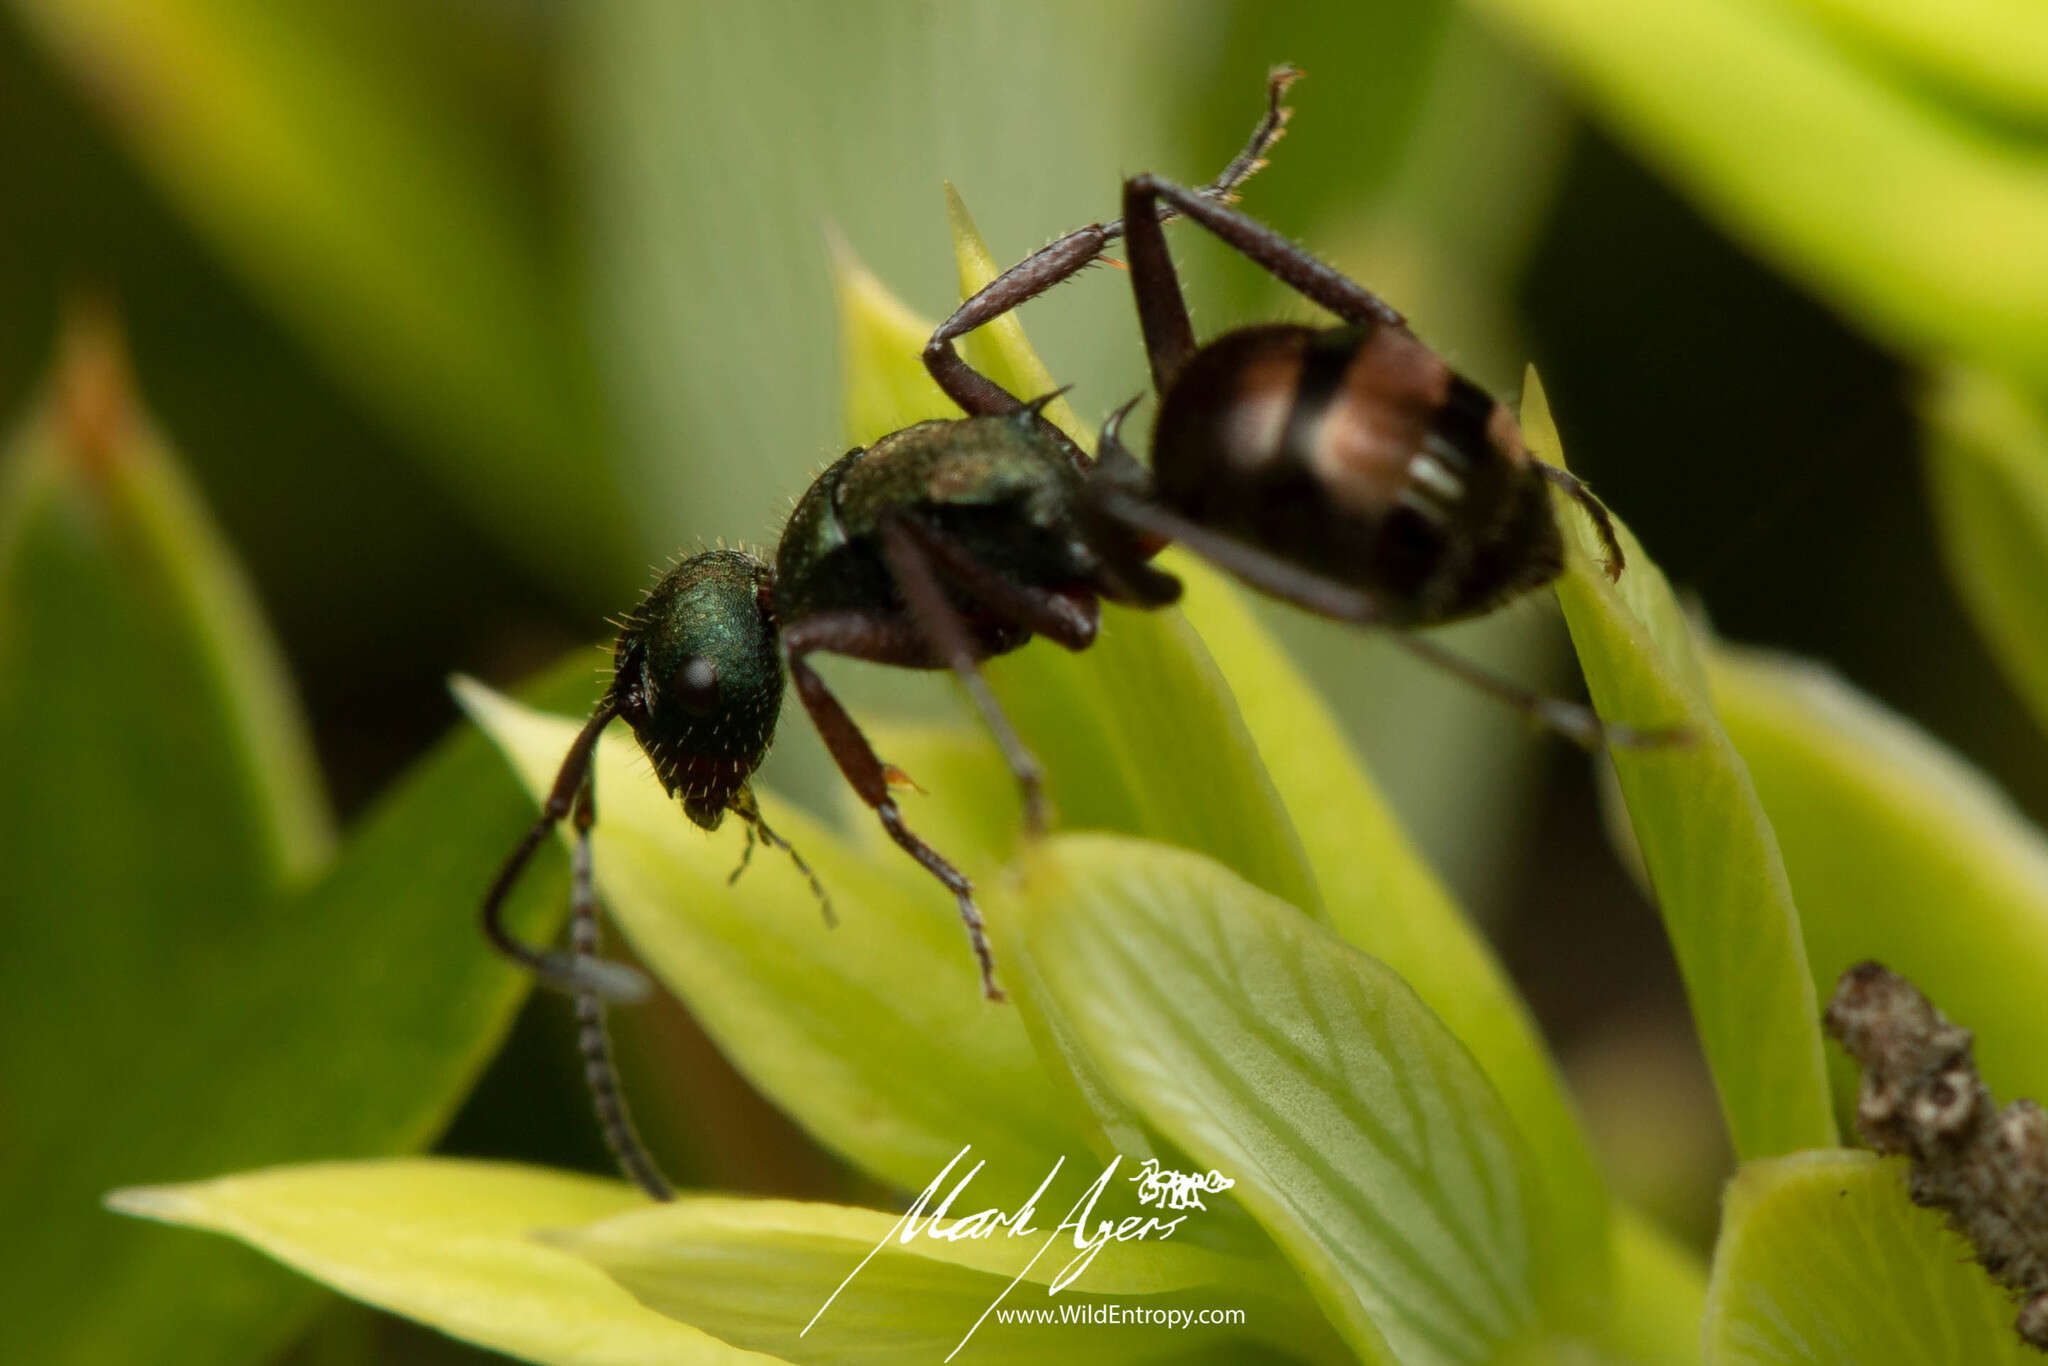 Image of Polyrhachis lydiae Forel 1902